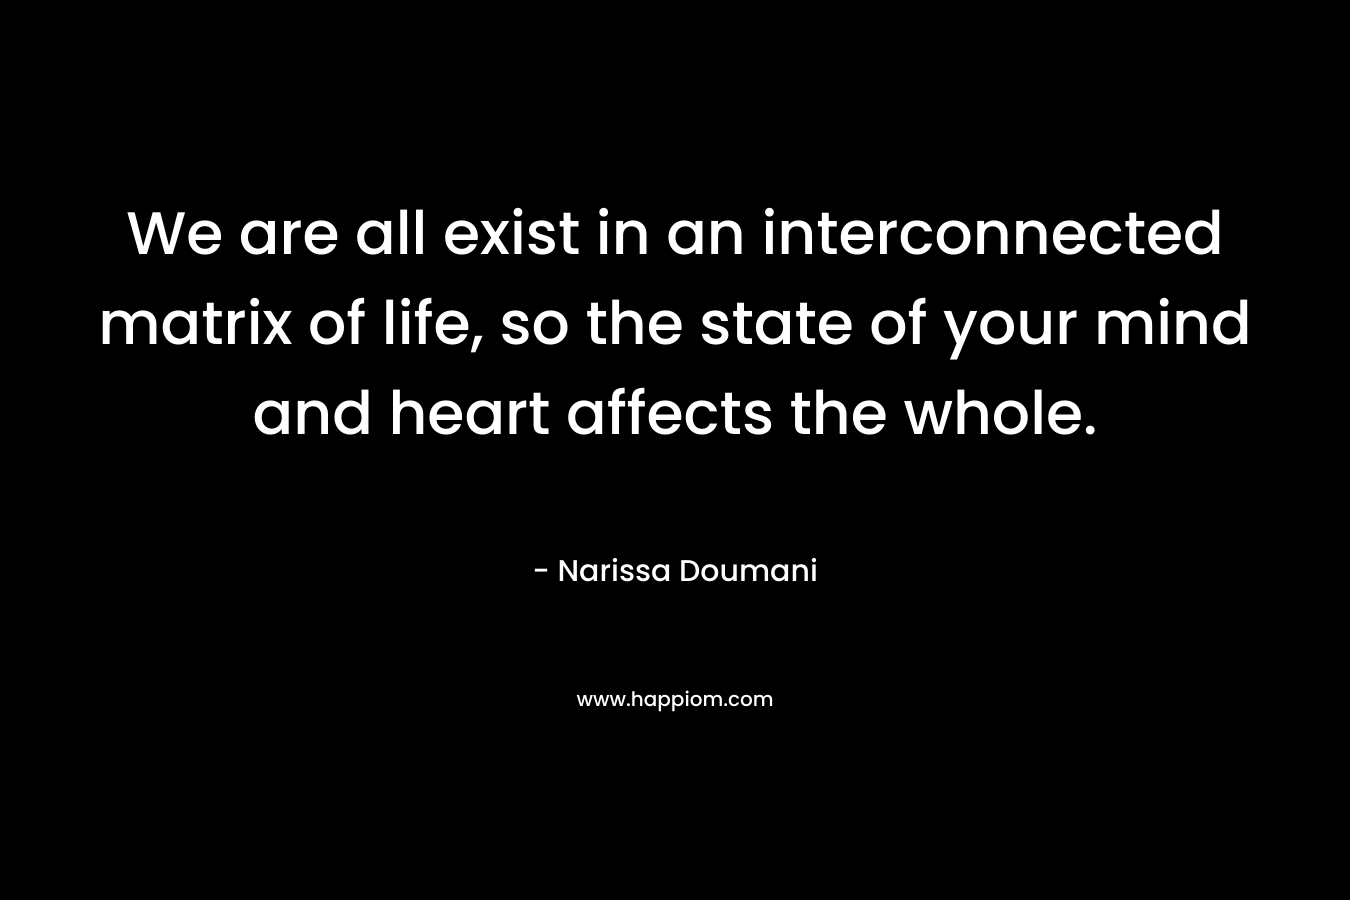 We are all exist in an interconnected matrix of life, so the state of your mind and heart affects the whole.